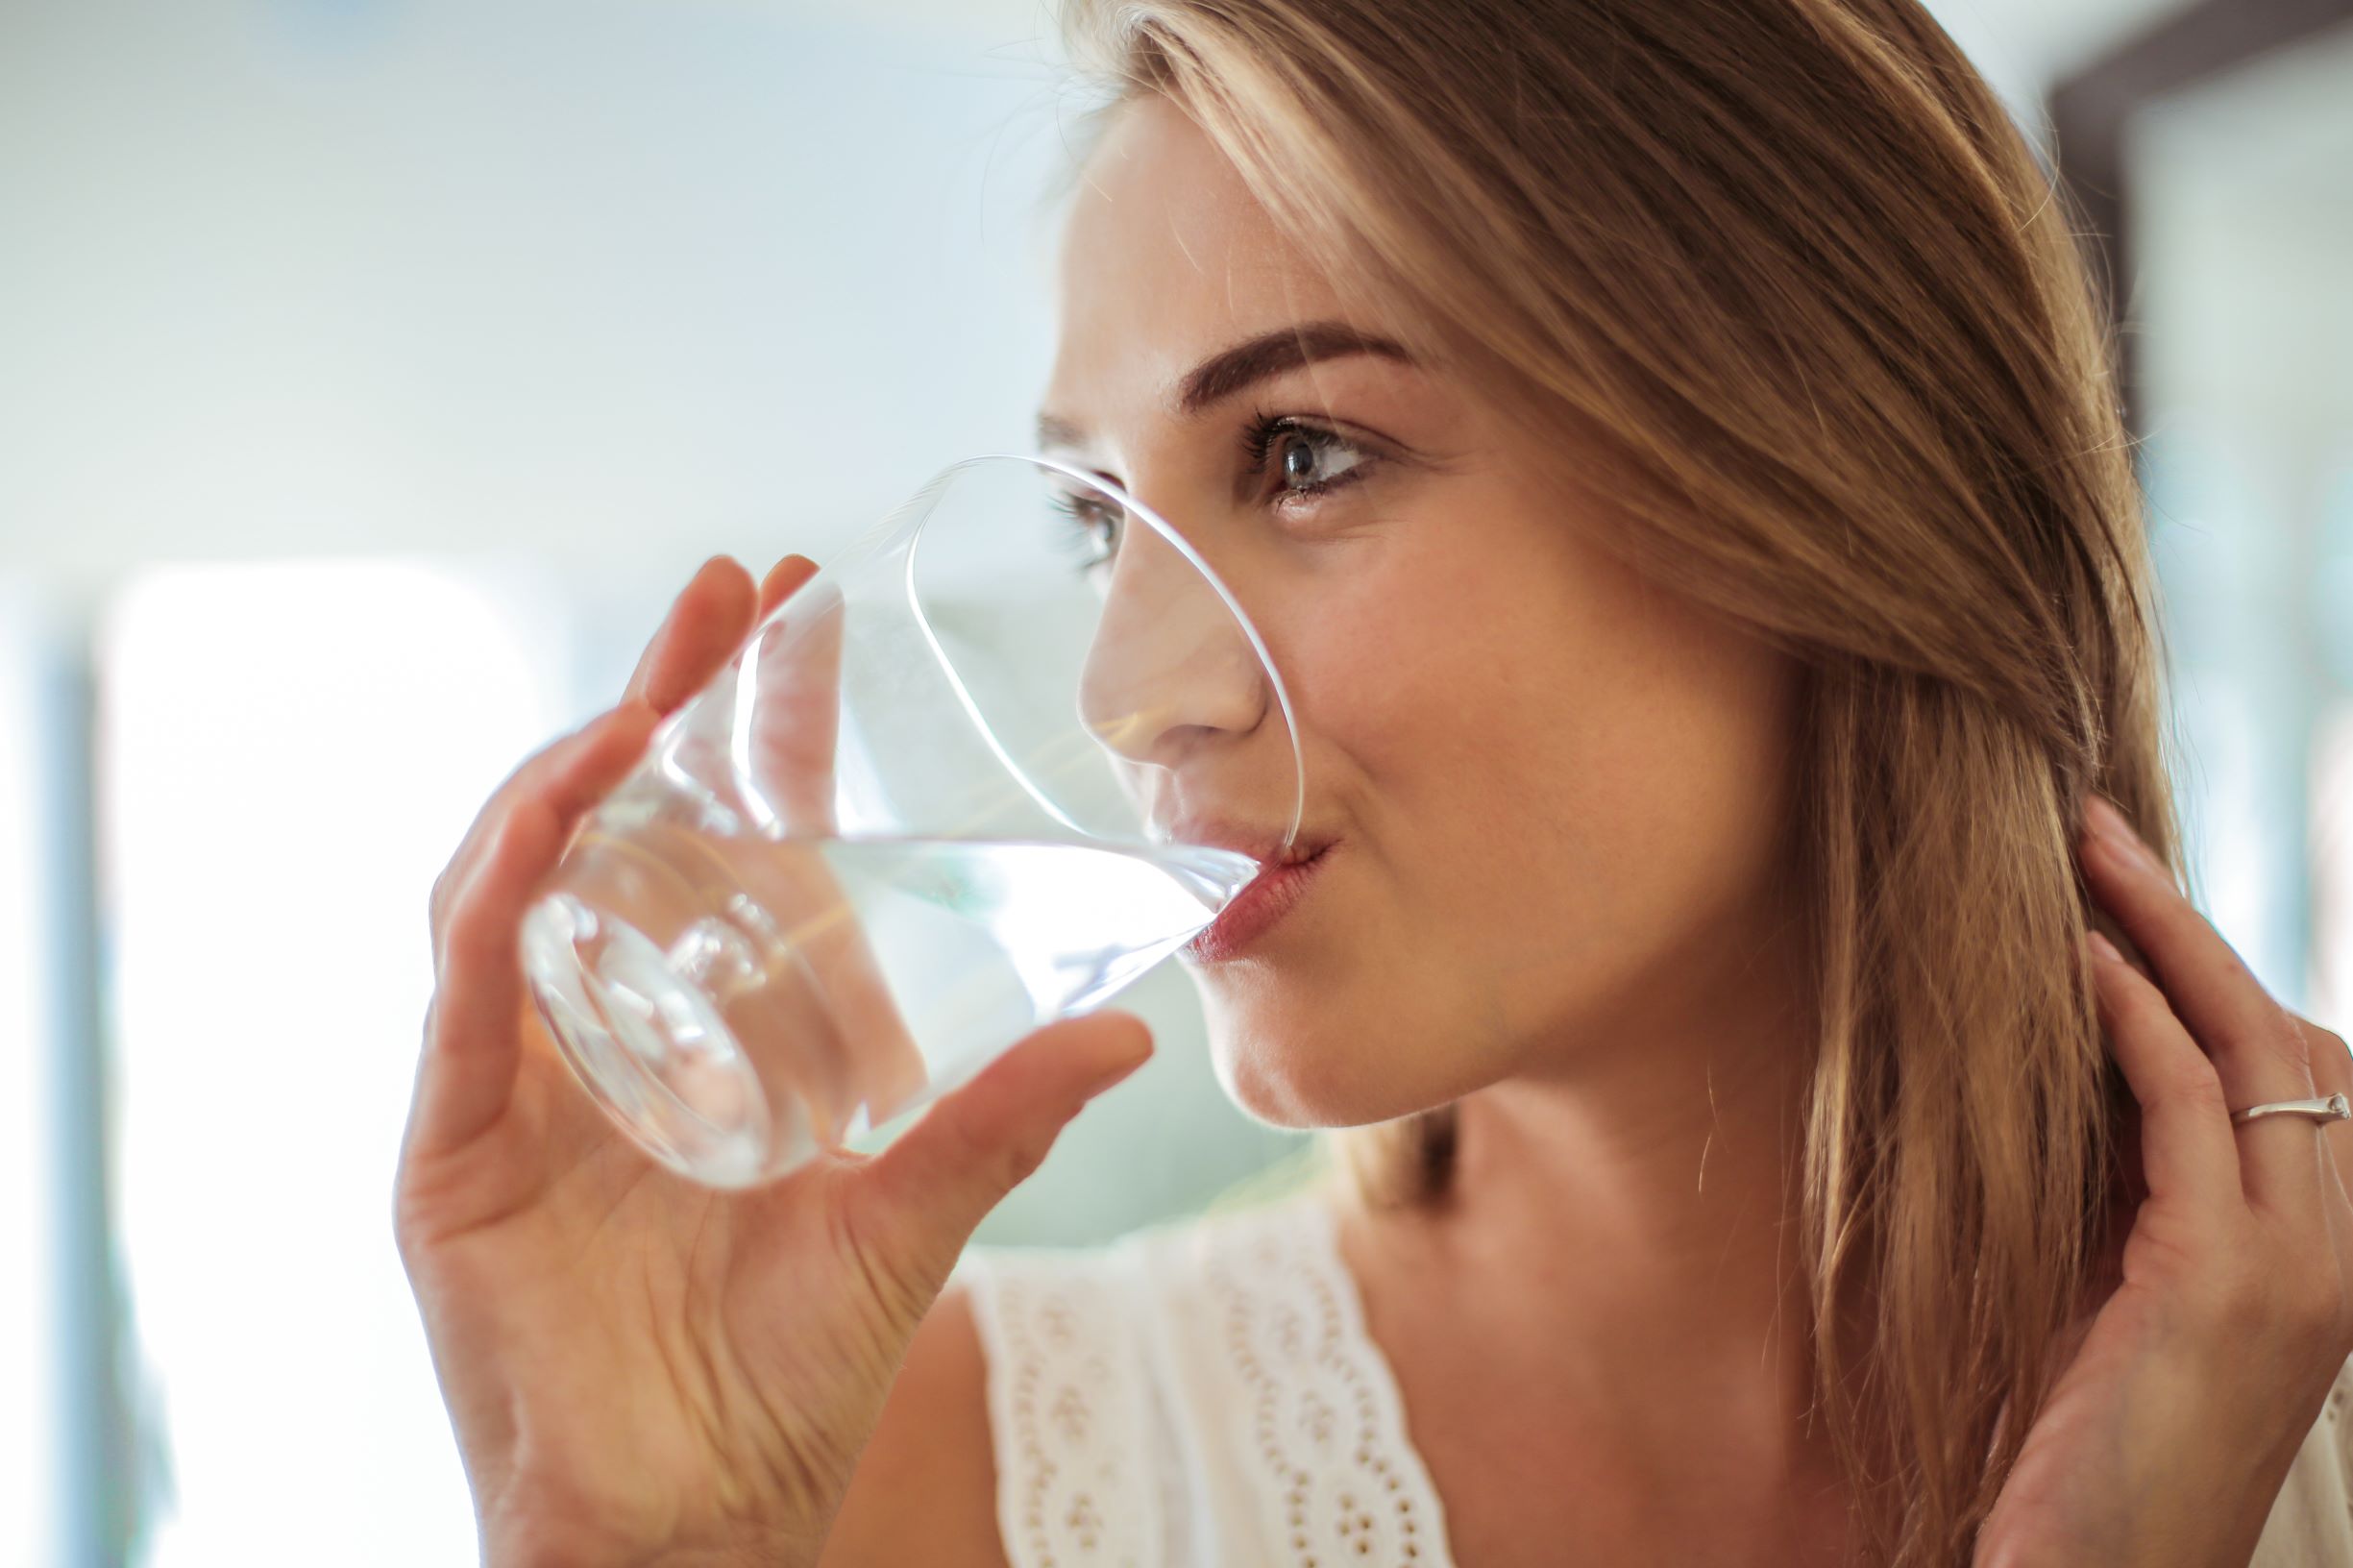 Experience the Surprising Benefits of Proper Hydration - Ask The Scientists